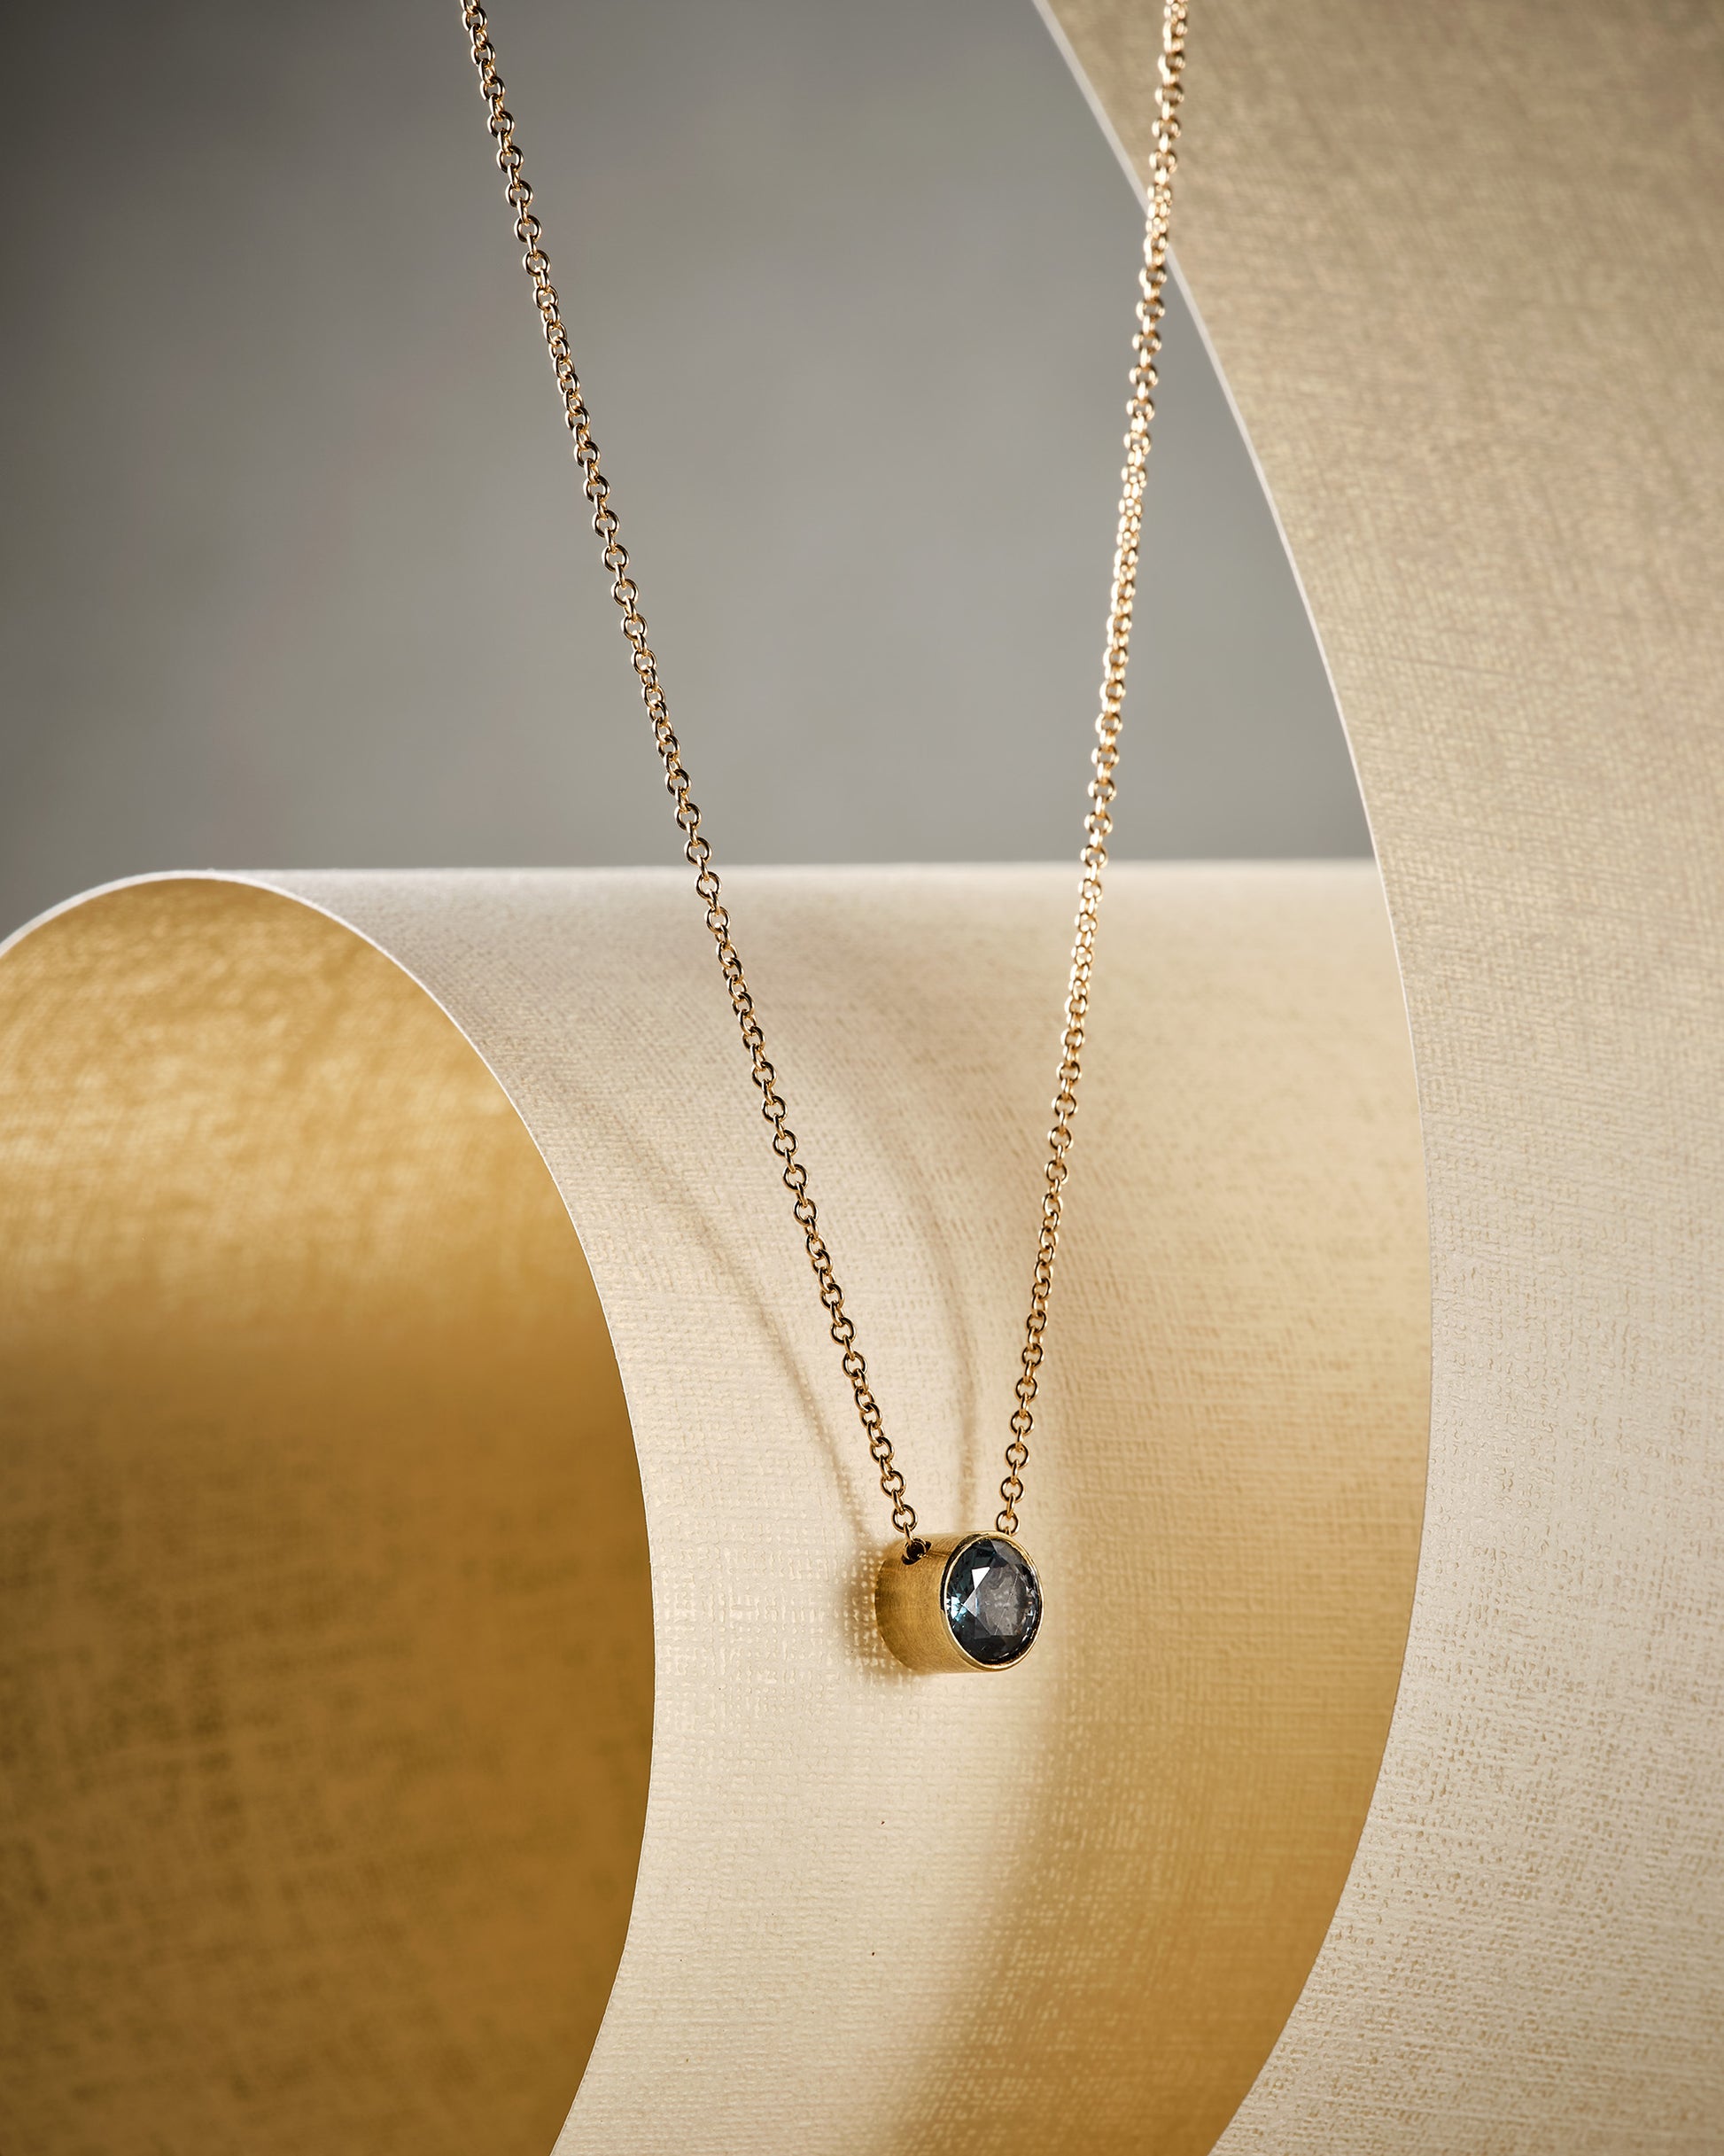 modern, classic delicate blue grey spinel gold necklace on beige material with shadow